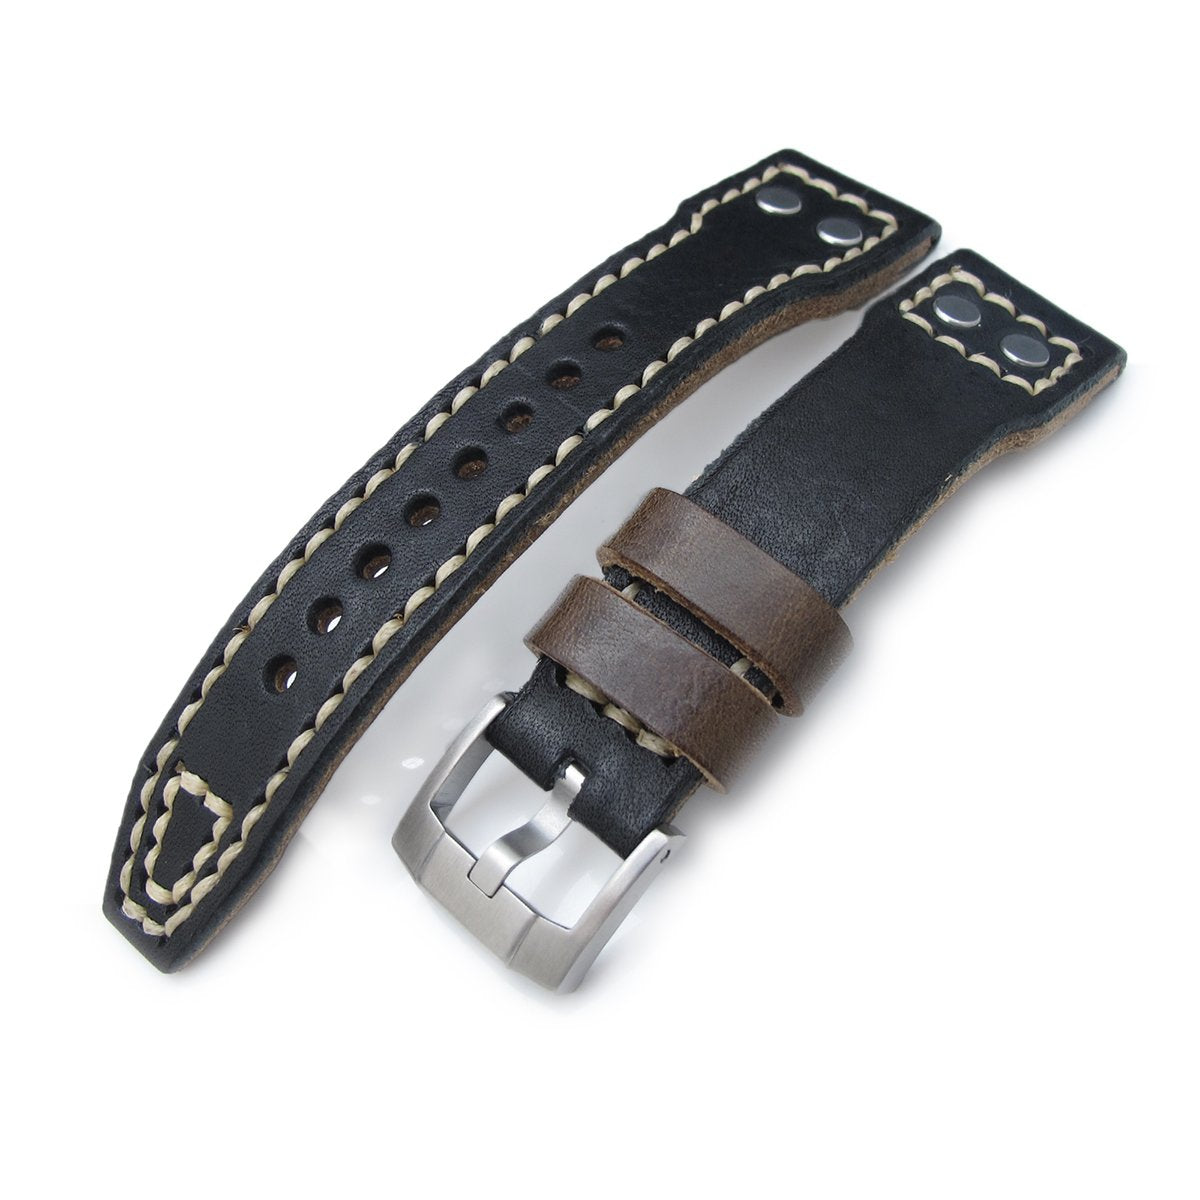 21mm 22mm MiLTAT Black Pull Up Aniline Italian Leather Watch Strap Rivet Military strap Strapcode Watch Bands